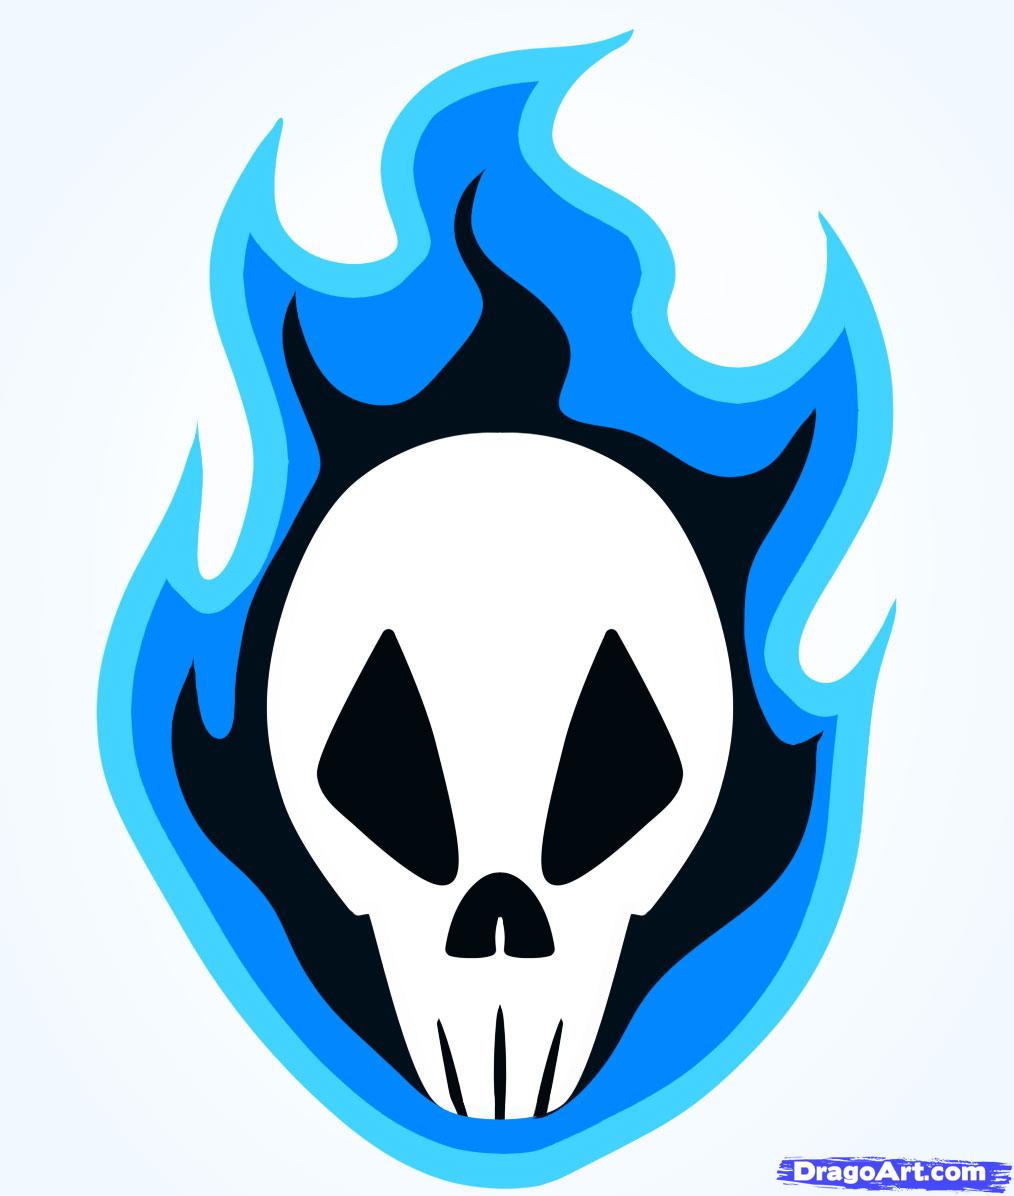 How to Draw a Fire Skull, Step by Step, Skulls, Pop Culture, FREE ...